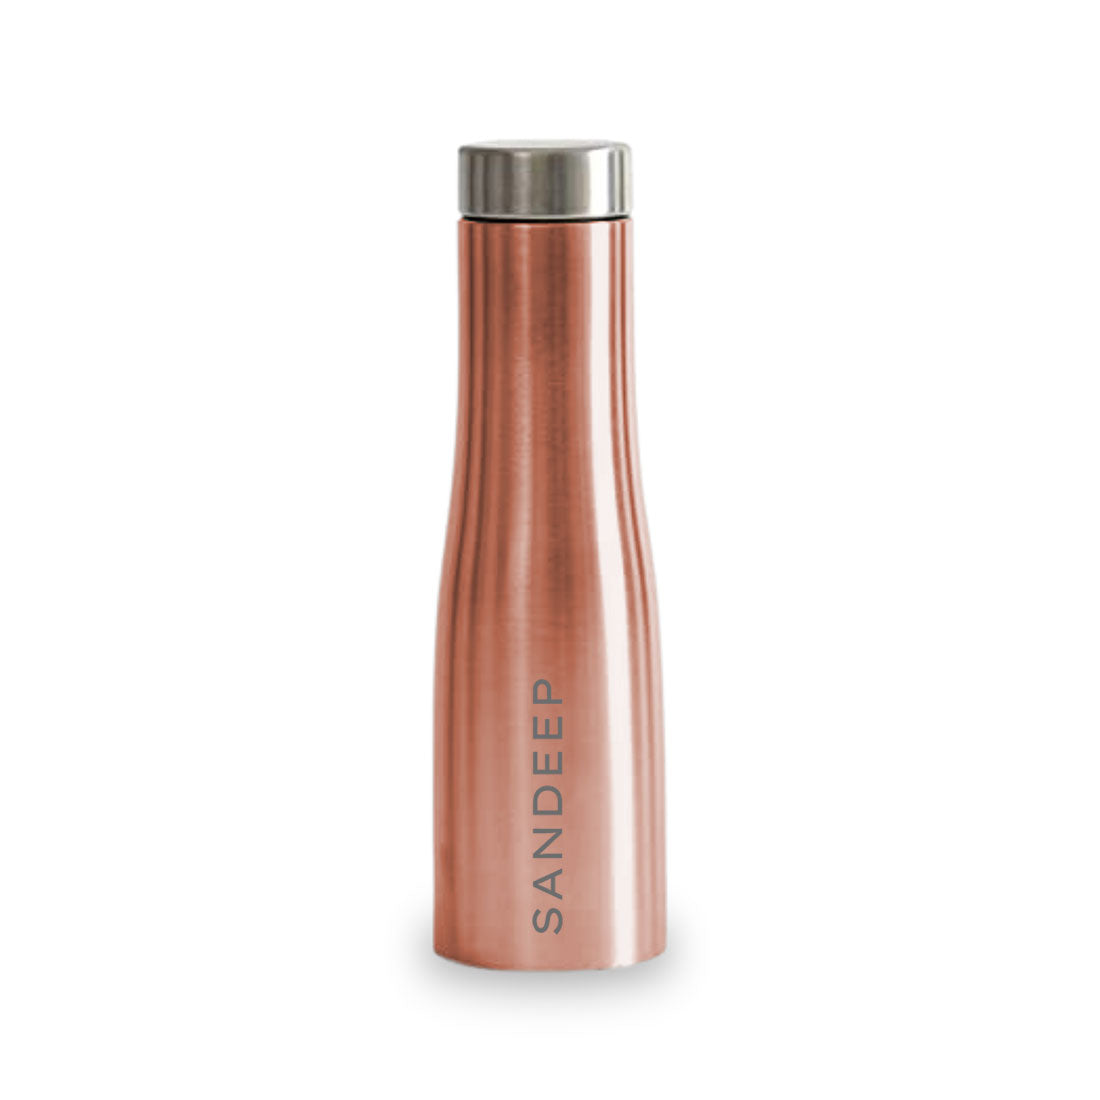 Personalised Steel Water Bottle for Home Office Cafes Restaurants-Rose Gold 750ml